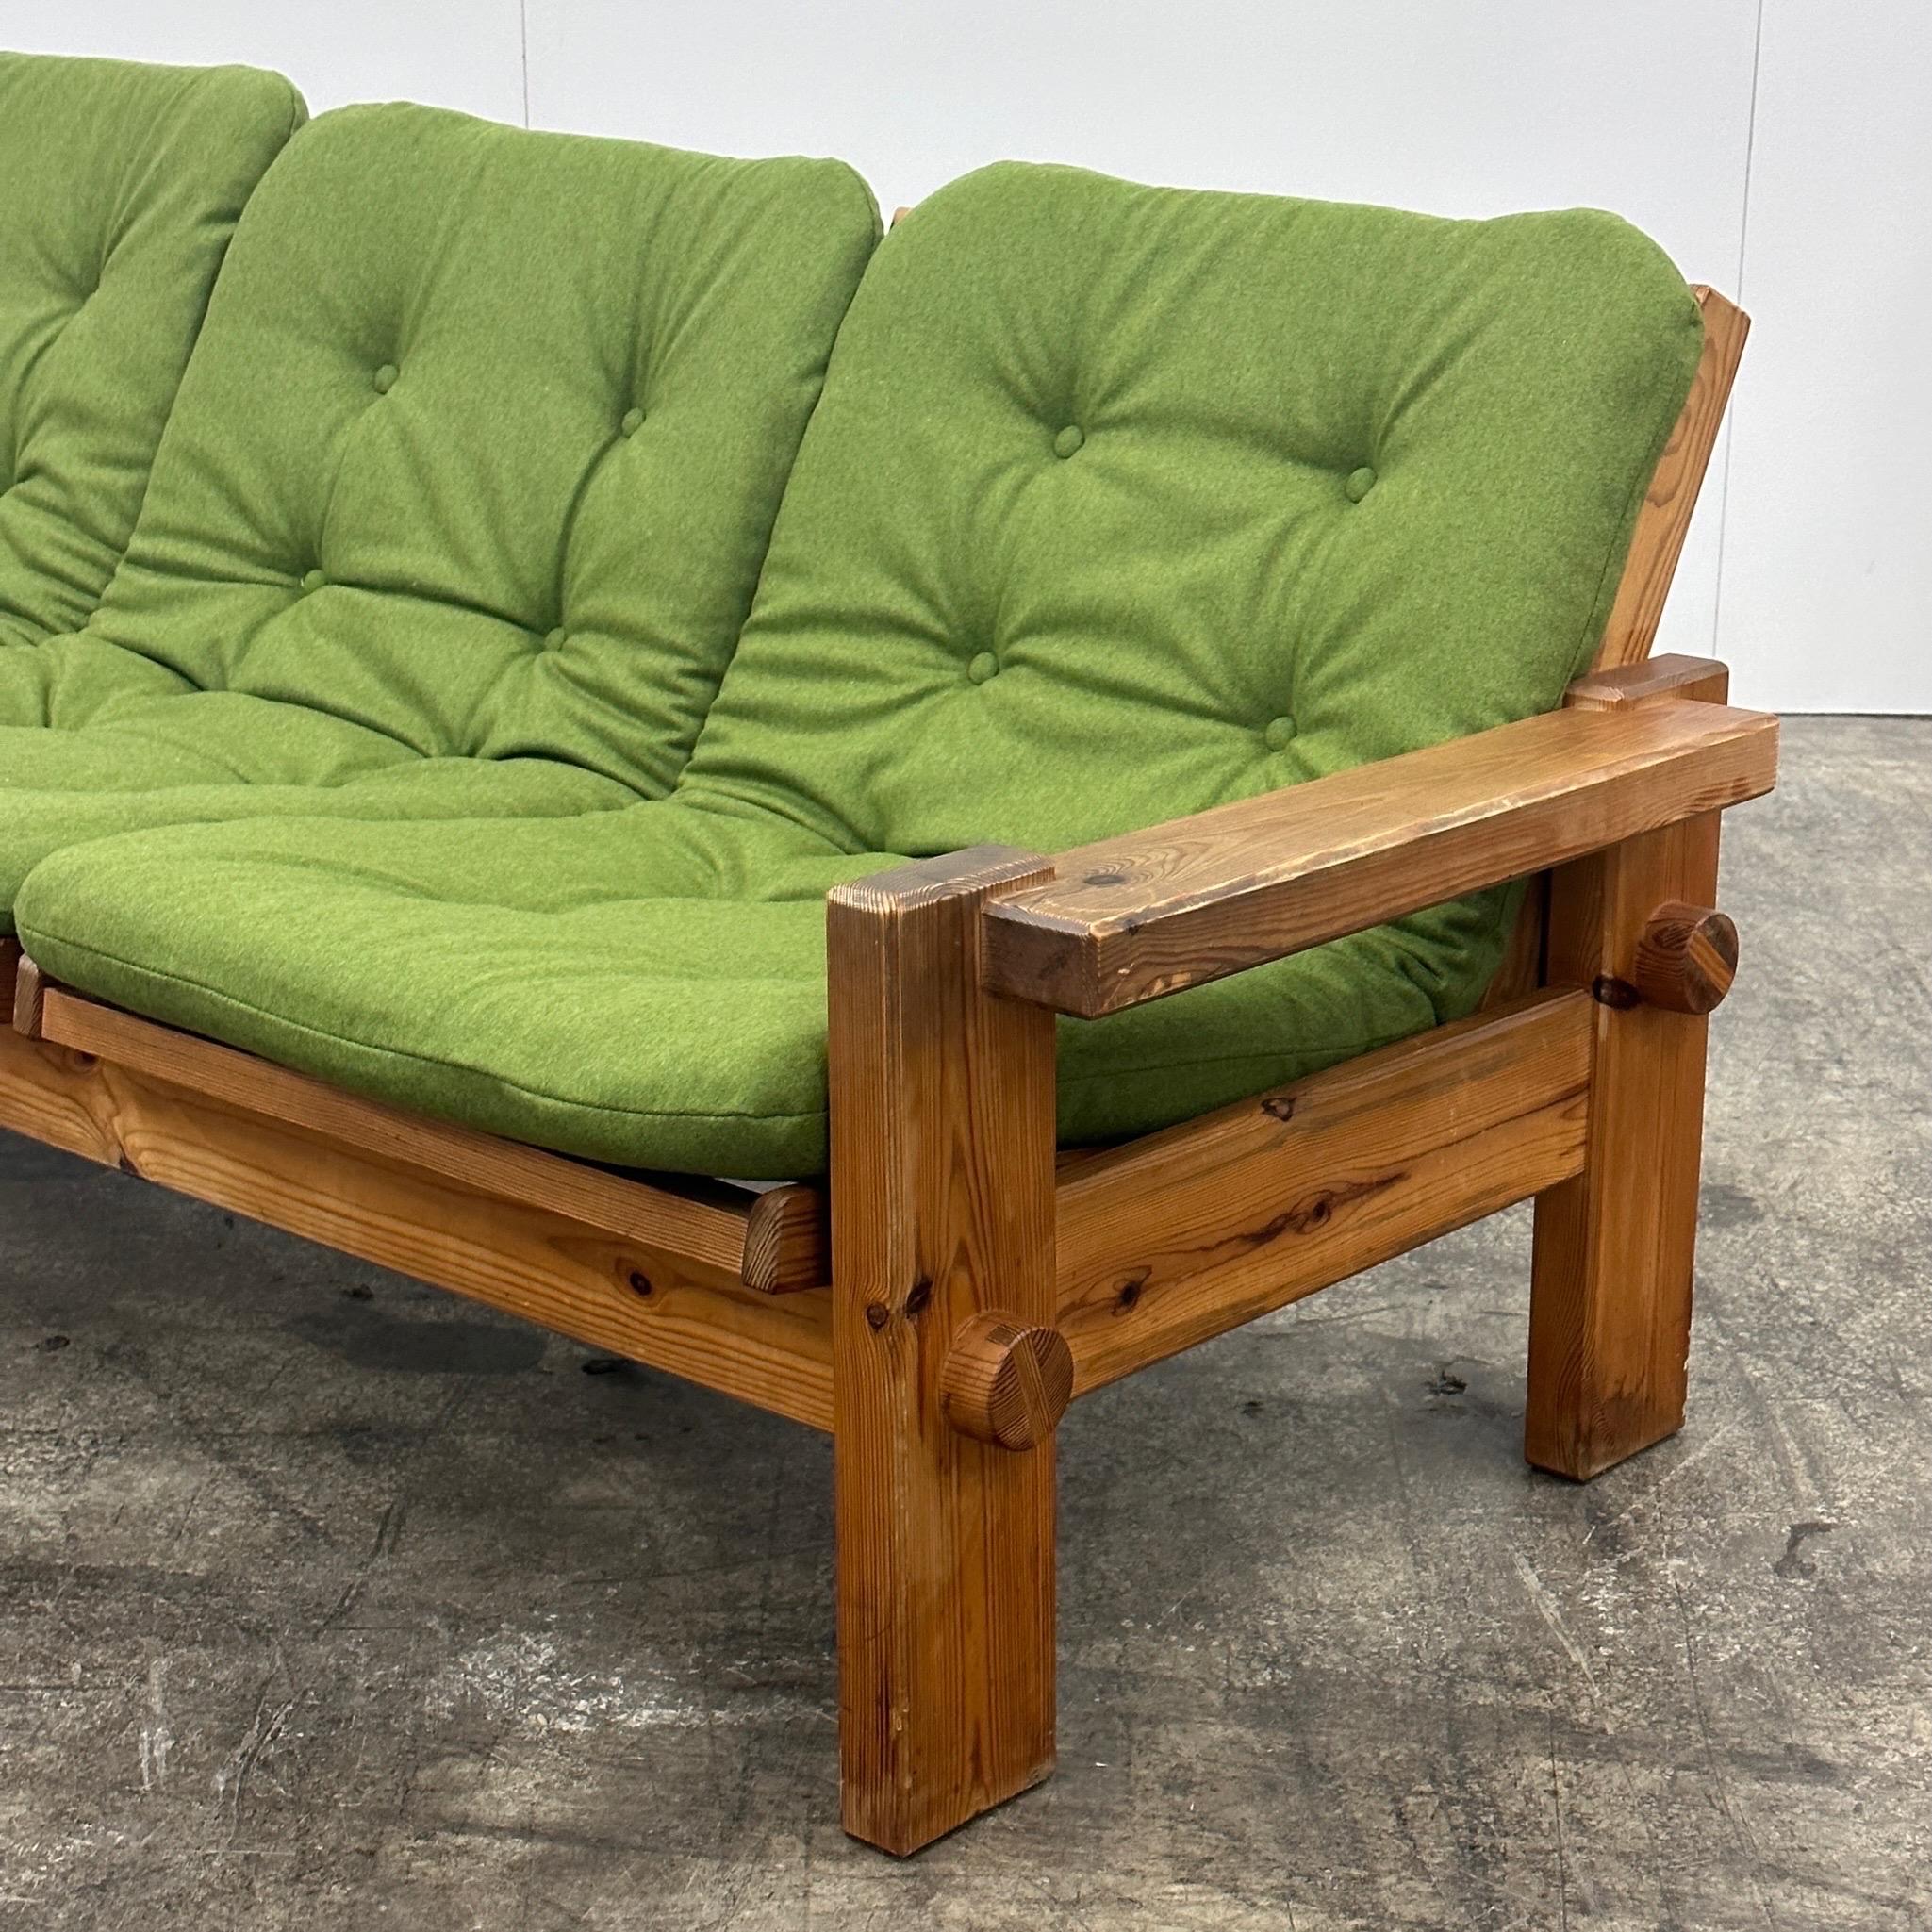 c. 1970s. Constructed of full pine throughout. Upholstered in green kiwi wool fabric. Made in Sweden by Swedese. We have a full set available, contact us if you’re looking for more. 